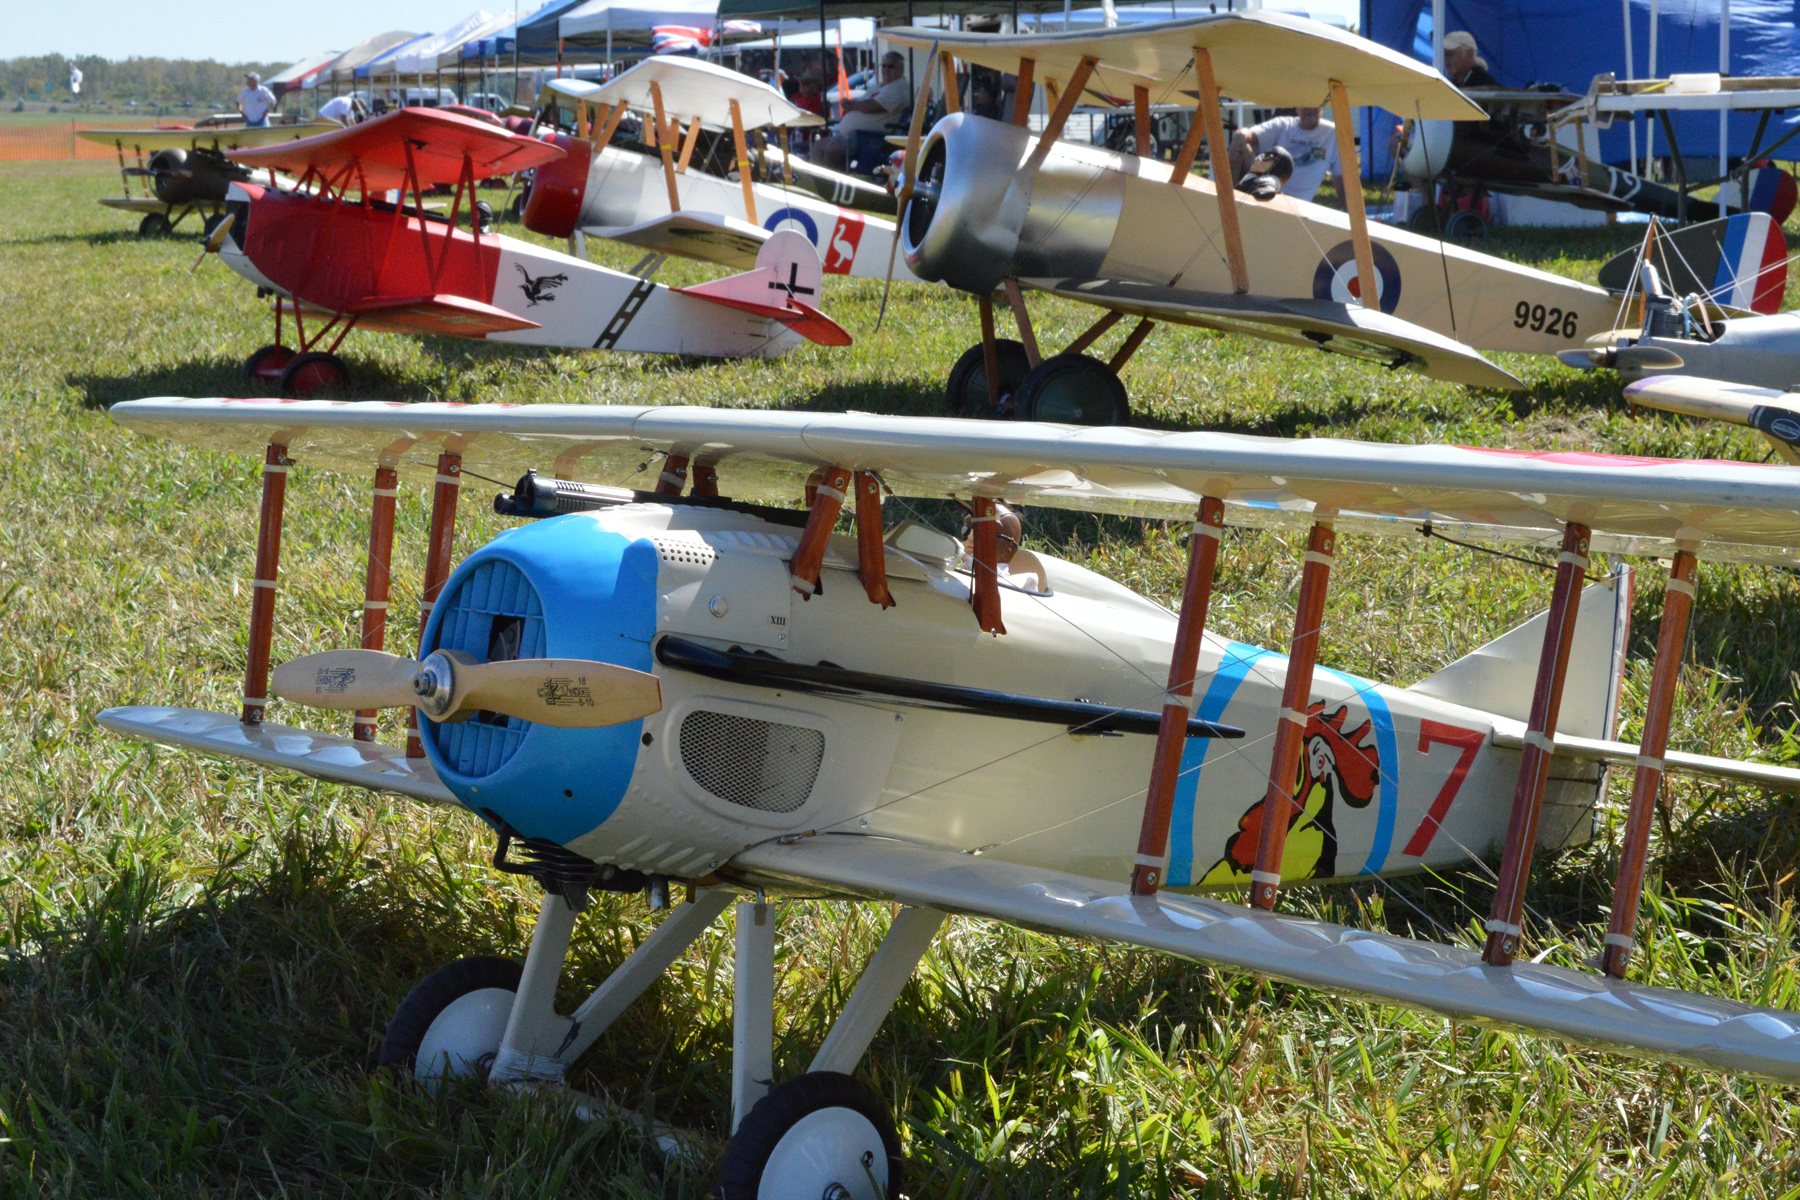  WWI-era radio-controlled model aircraft, some as large as 1/2-scale, will perform during the WWI Dawn Patrol Rendezvous, Oct. 1-2, 2016, at the National Museum of the U.S. Air Force. (U.S. Air Force photo)